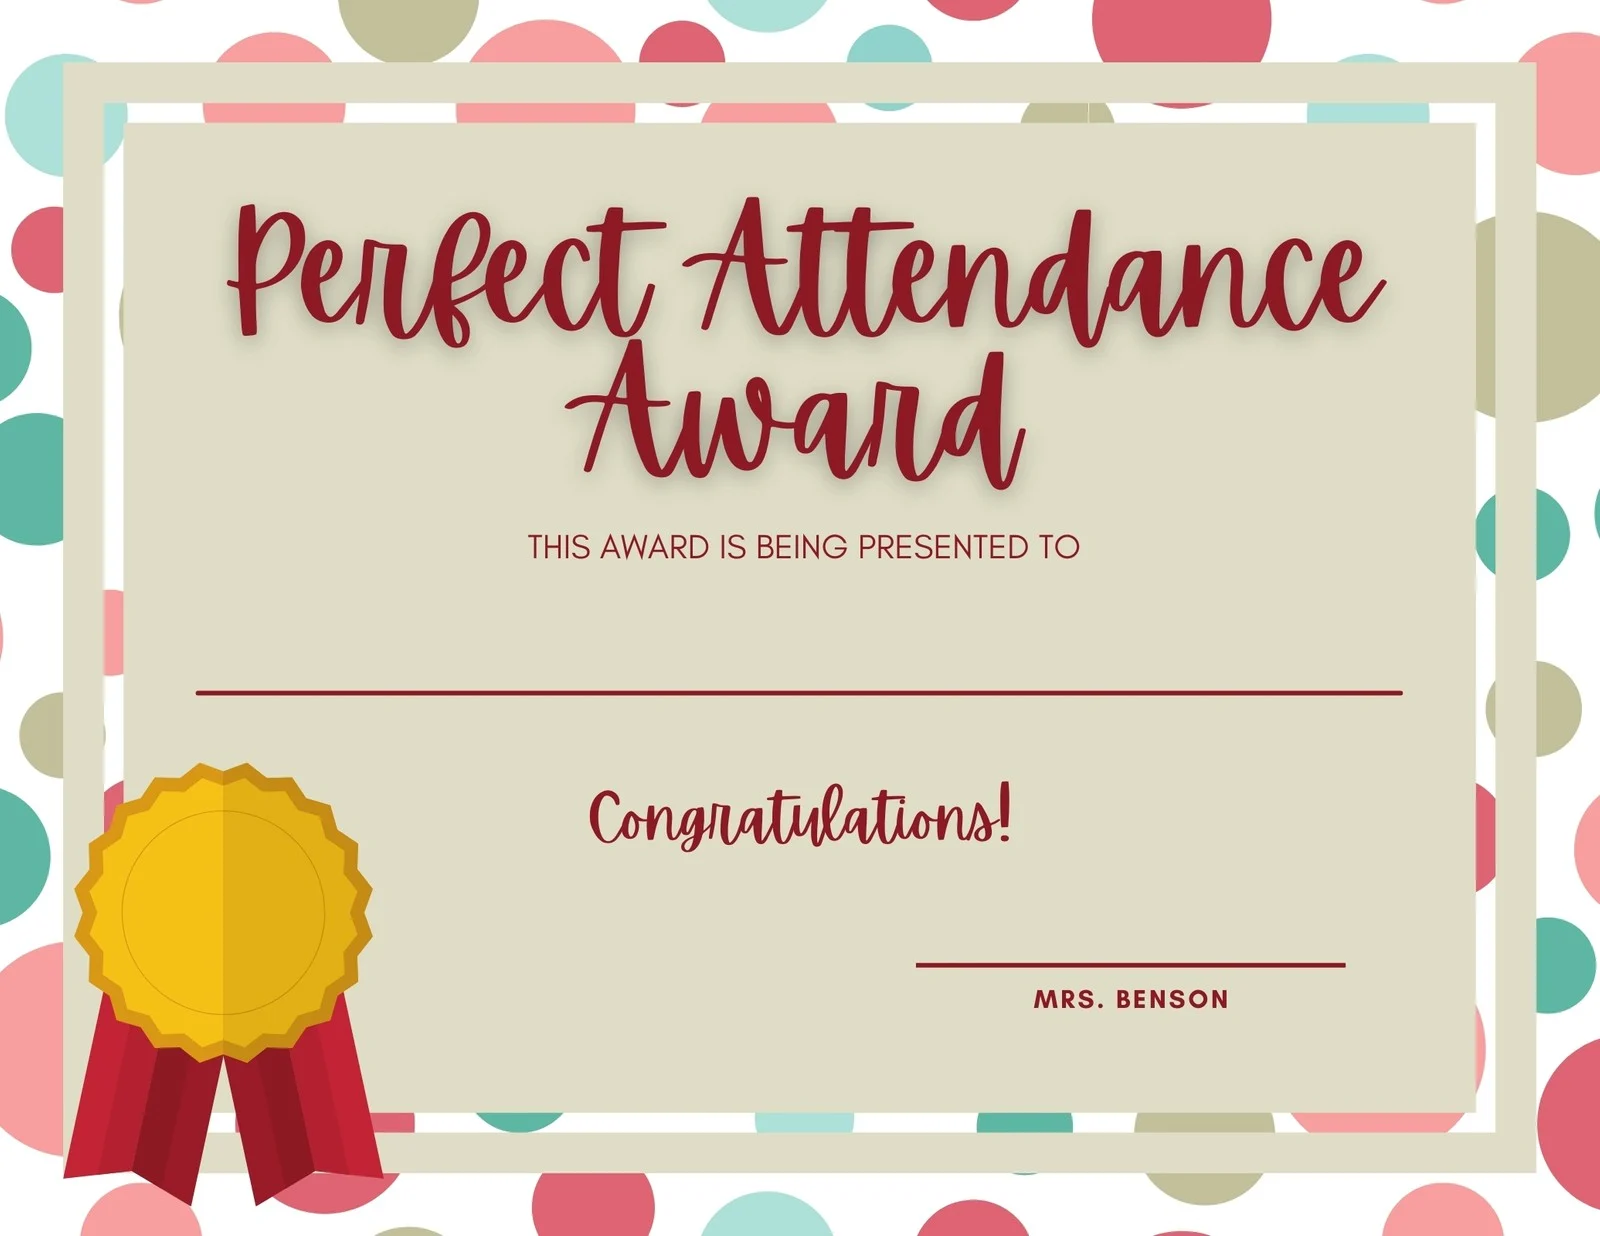 perfect attendance certificate template free, free perfect attendance certificate word template, perfect attendance award certificate template, work perfect attendance certificate template, free printable perfect attendance certificate template, free perfect attendance certificate editable, certificate of perfect attendance deped